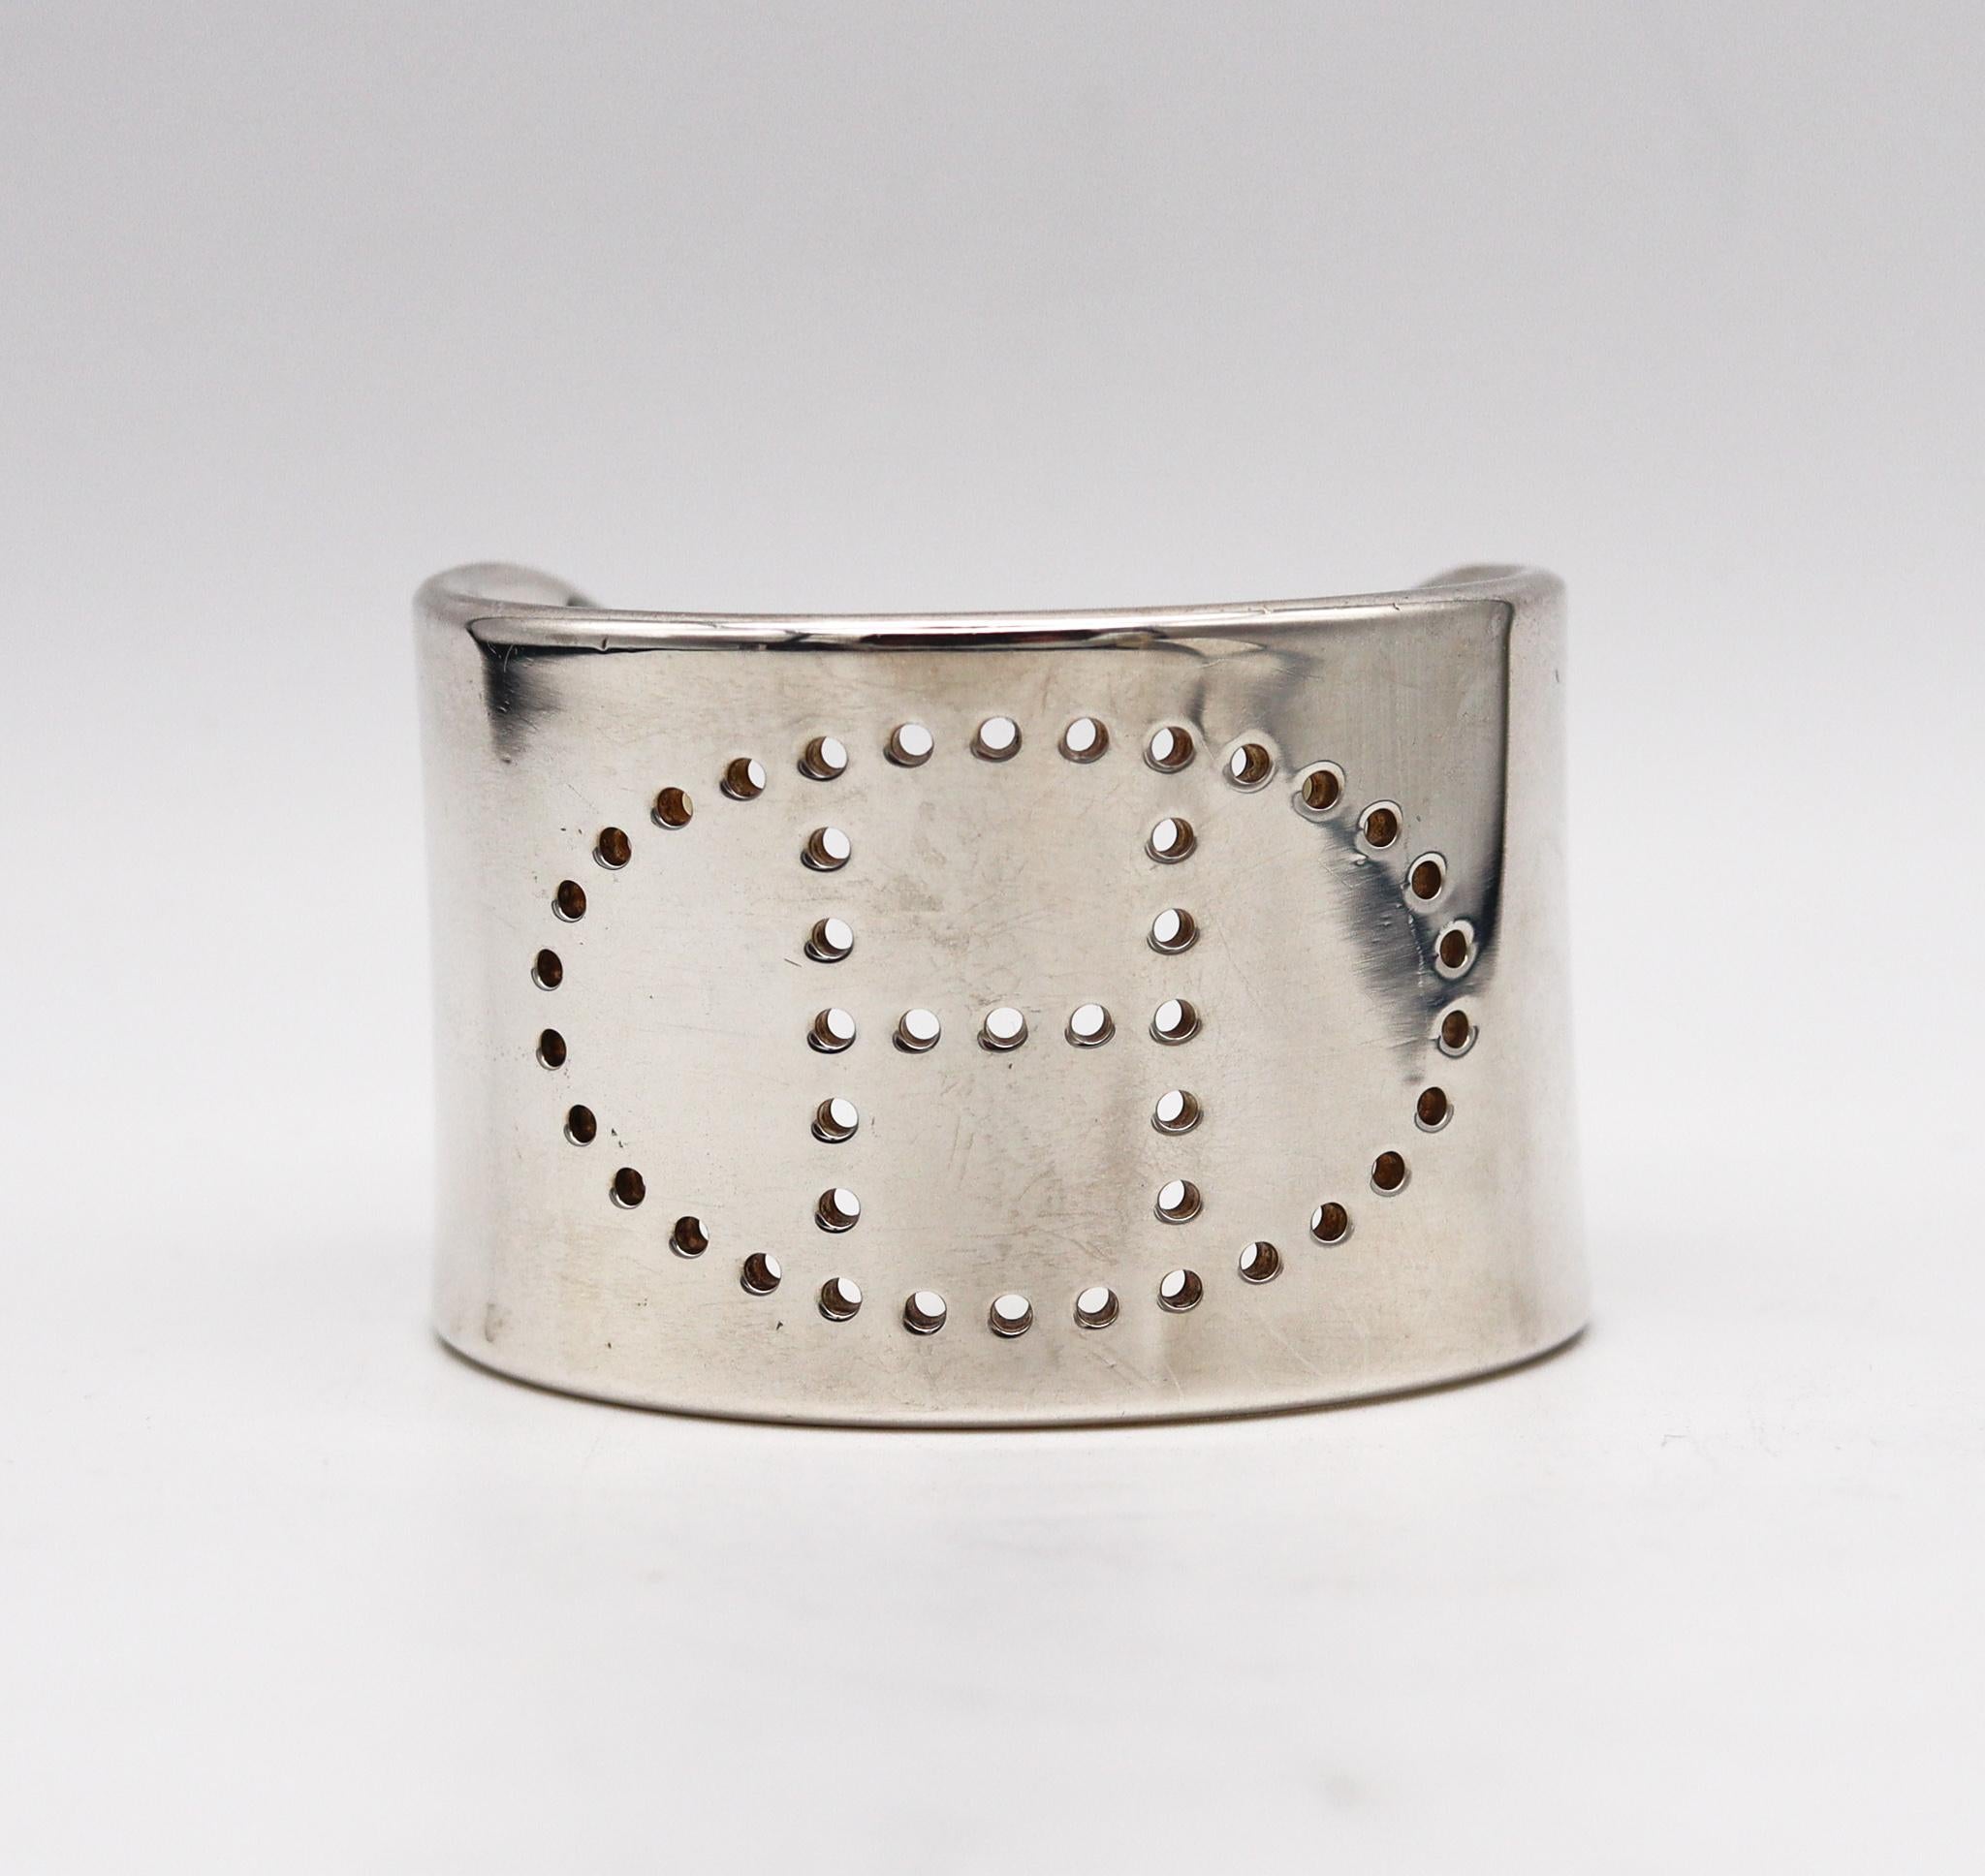 Eclypse cuff bracelet designed by Hermès.

A classic icon cuff bracelet, created in Paris France by the house of Hermès. This small Eclypse bracelet has been crafted with the company logo of the H, in solid sterling silver of .925/.999 with very